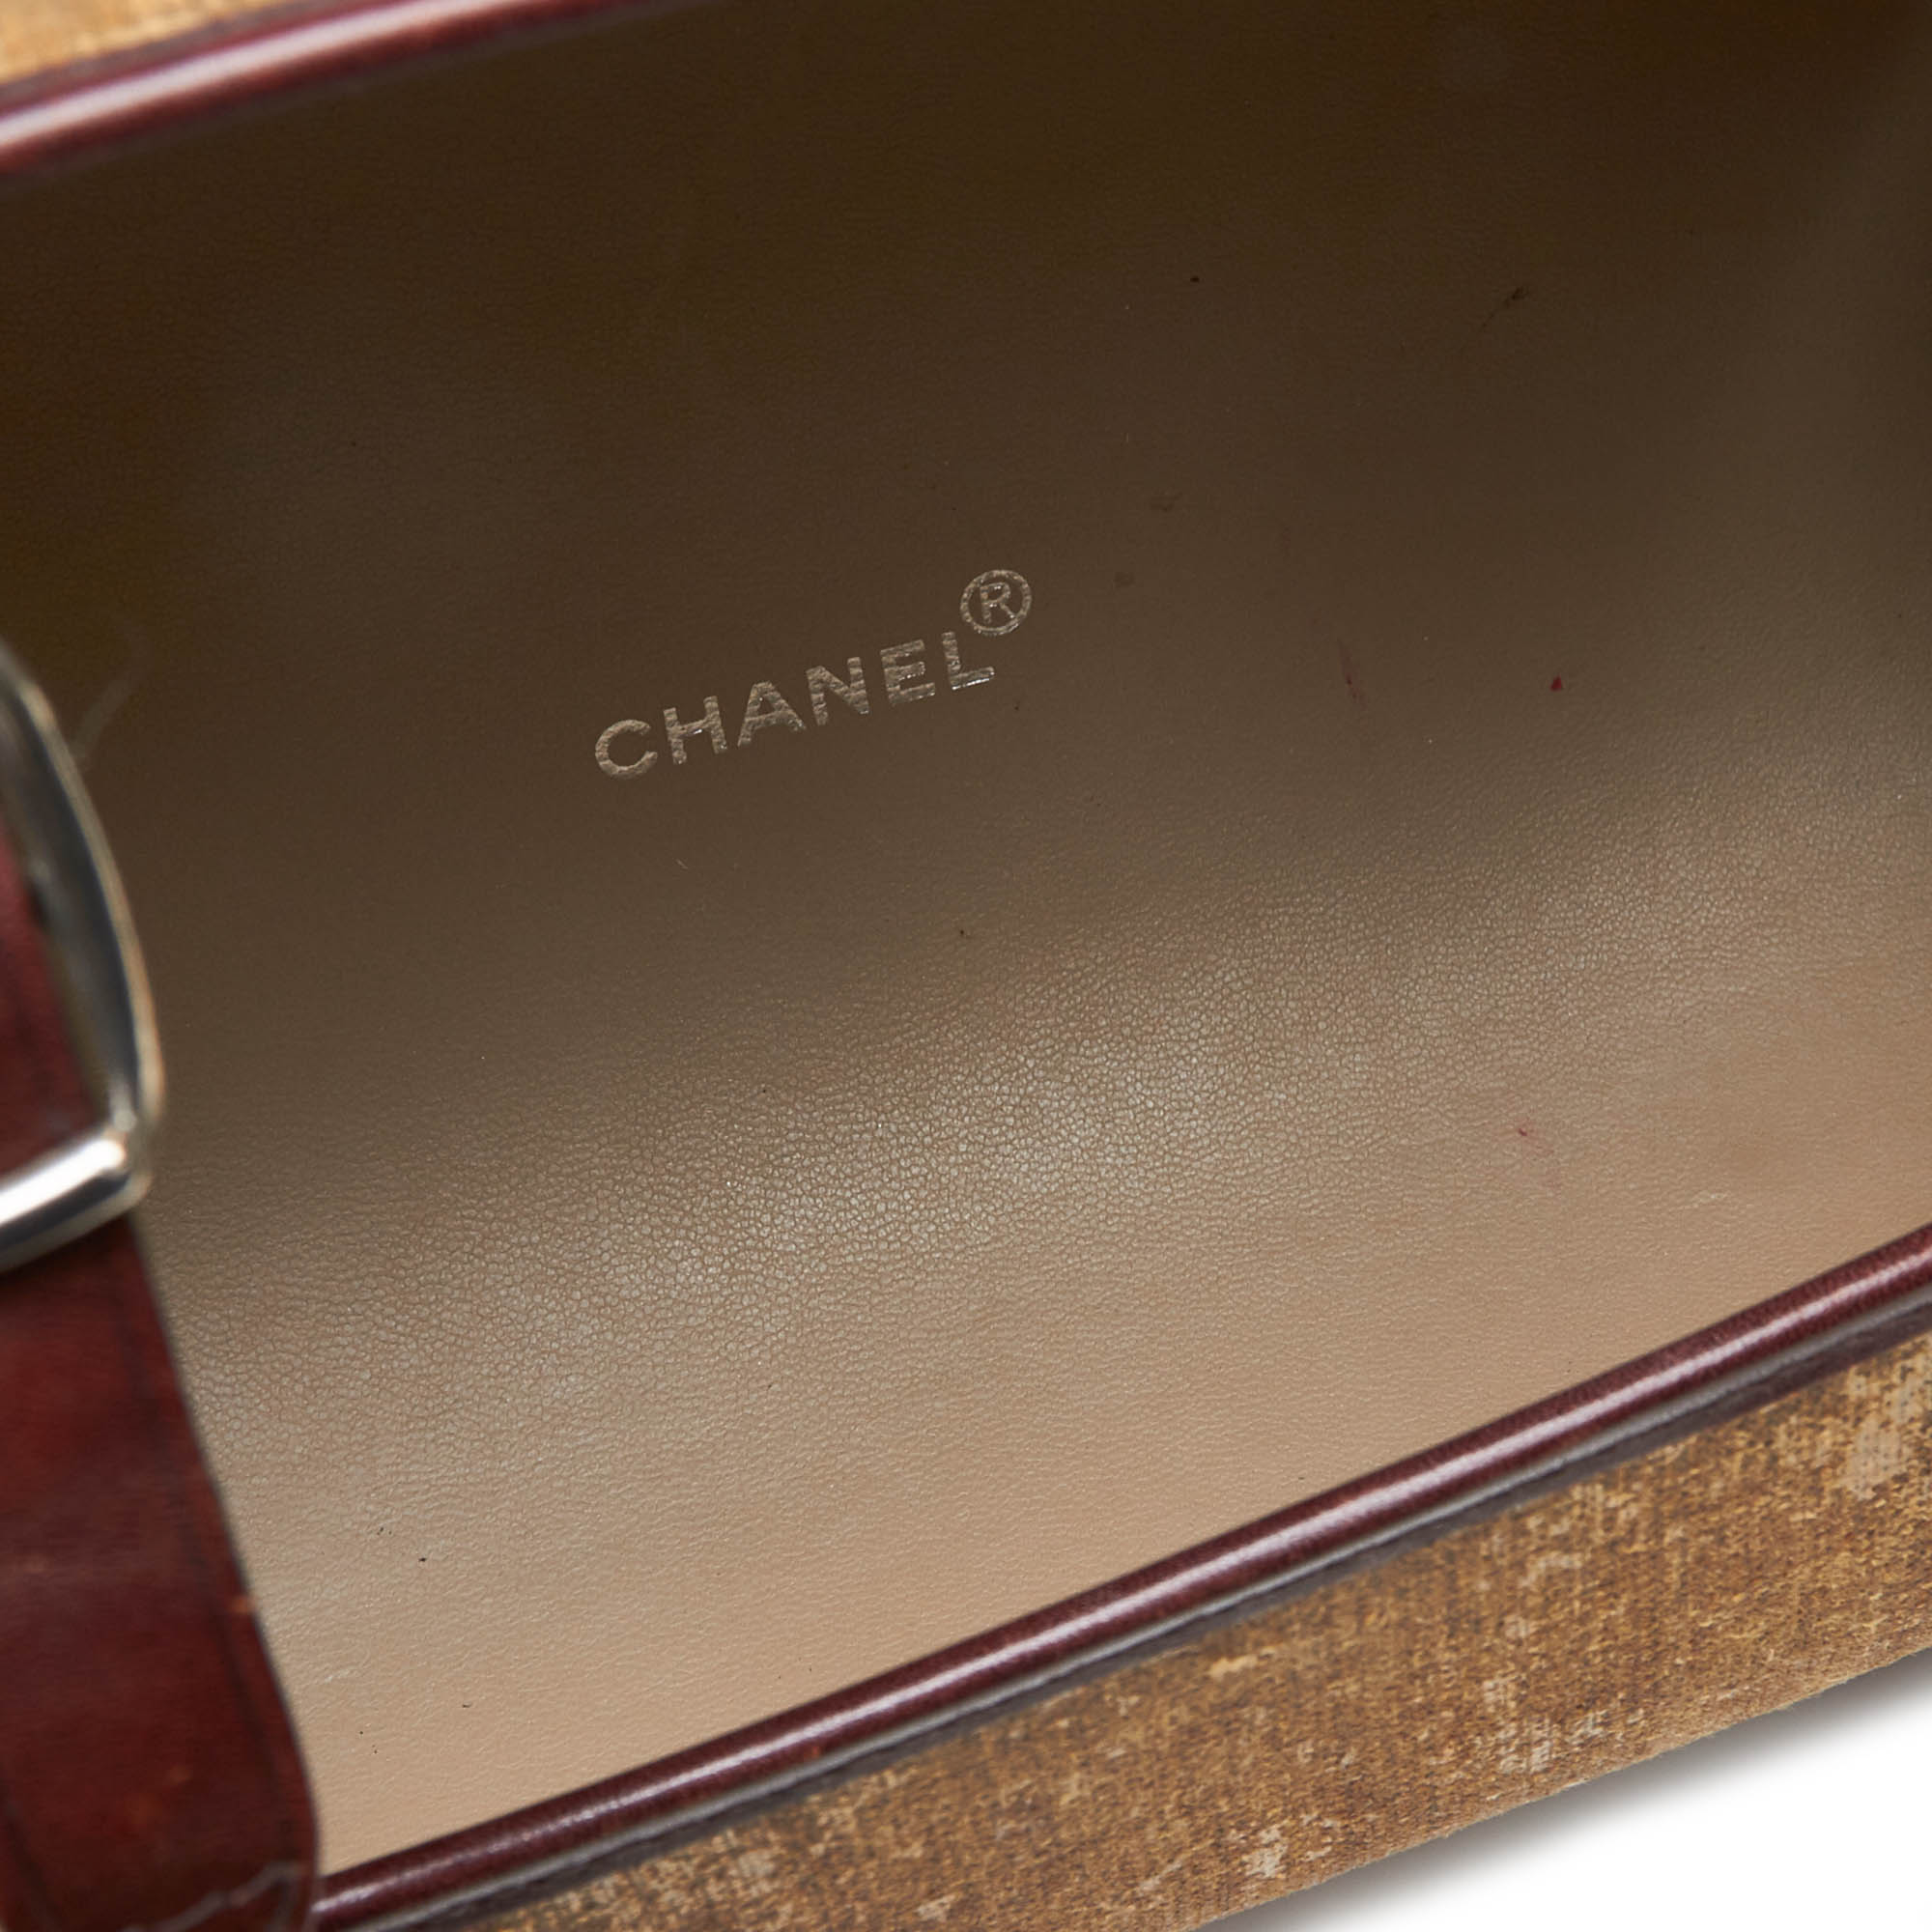 Chanel Fabric Handbag, this handbag features a fabric body with leather trim, a flat top handle, - Image 5 of 9